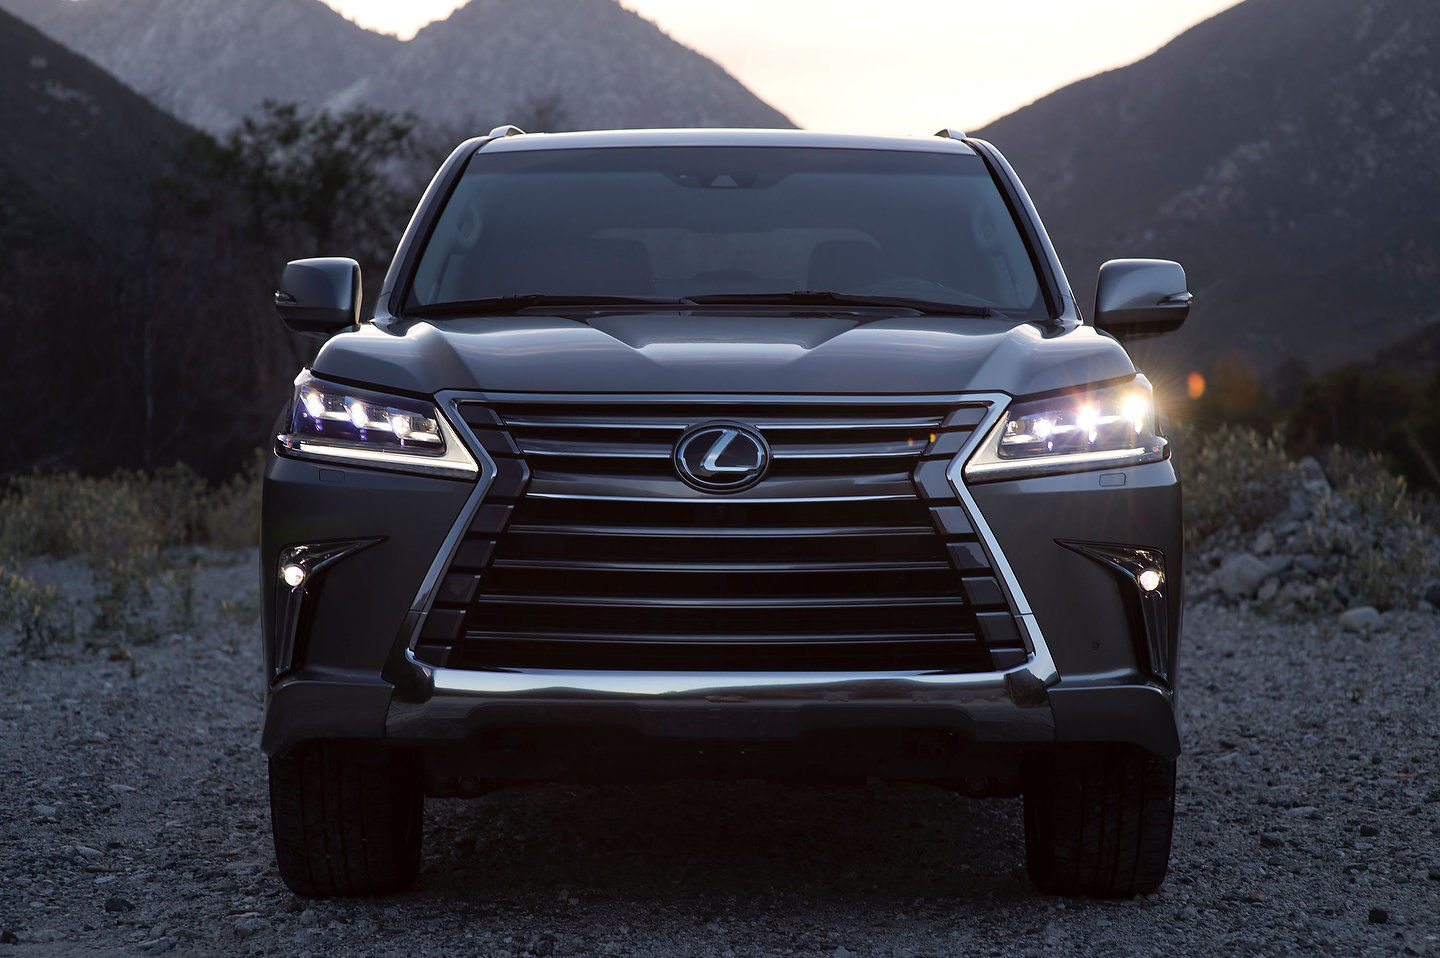 How Does the J.D. Power Classification Work and Why Is Lexus Still Well Represented in it?